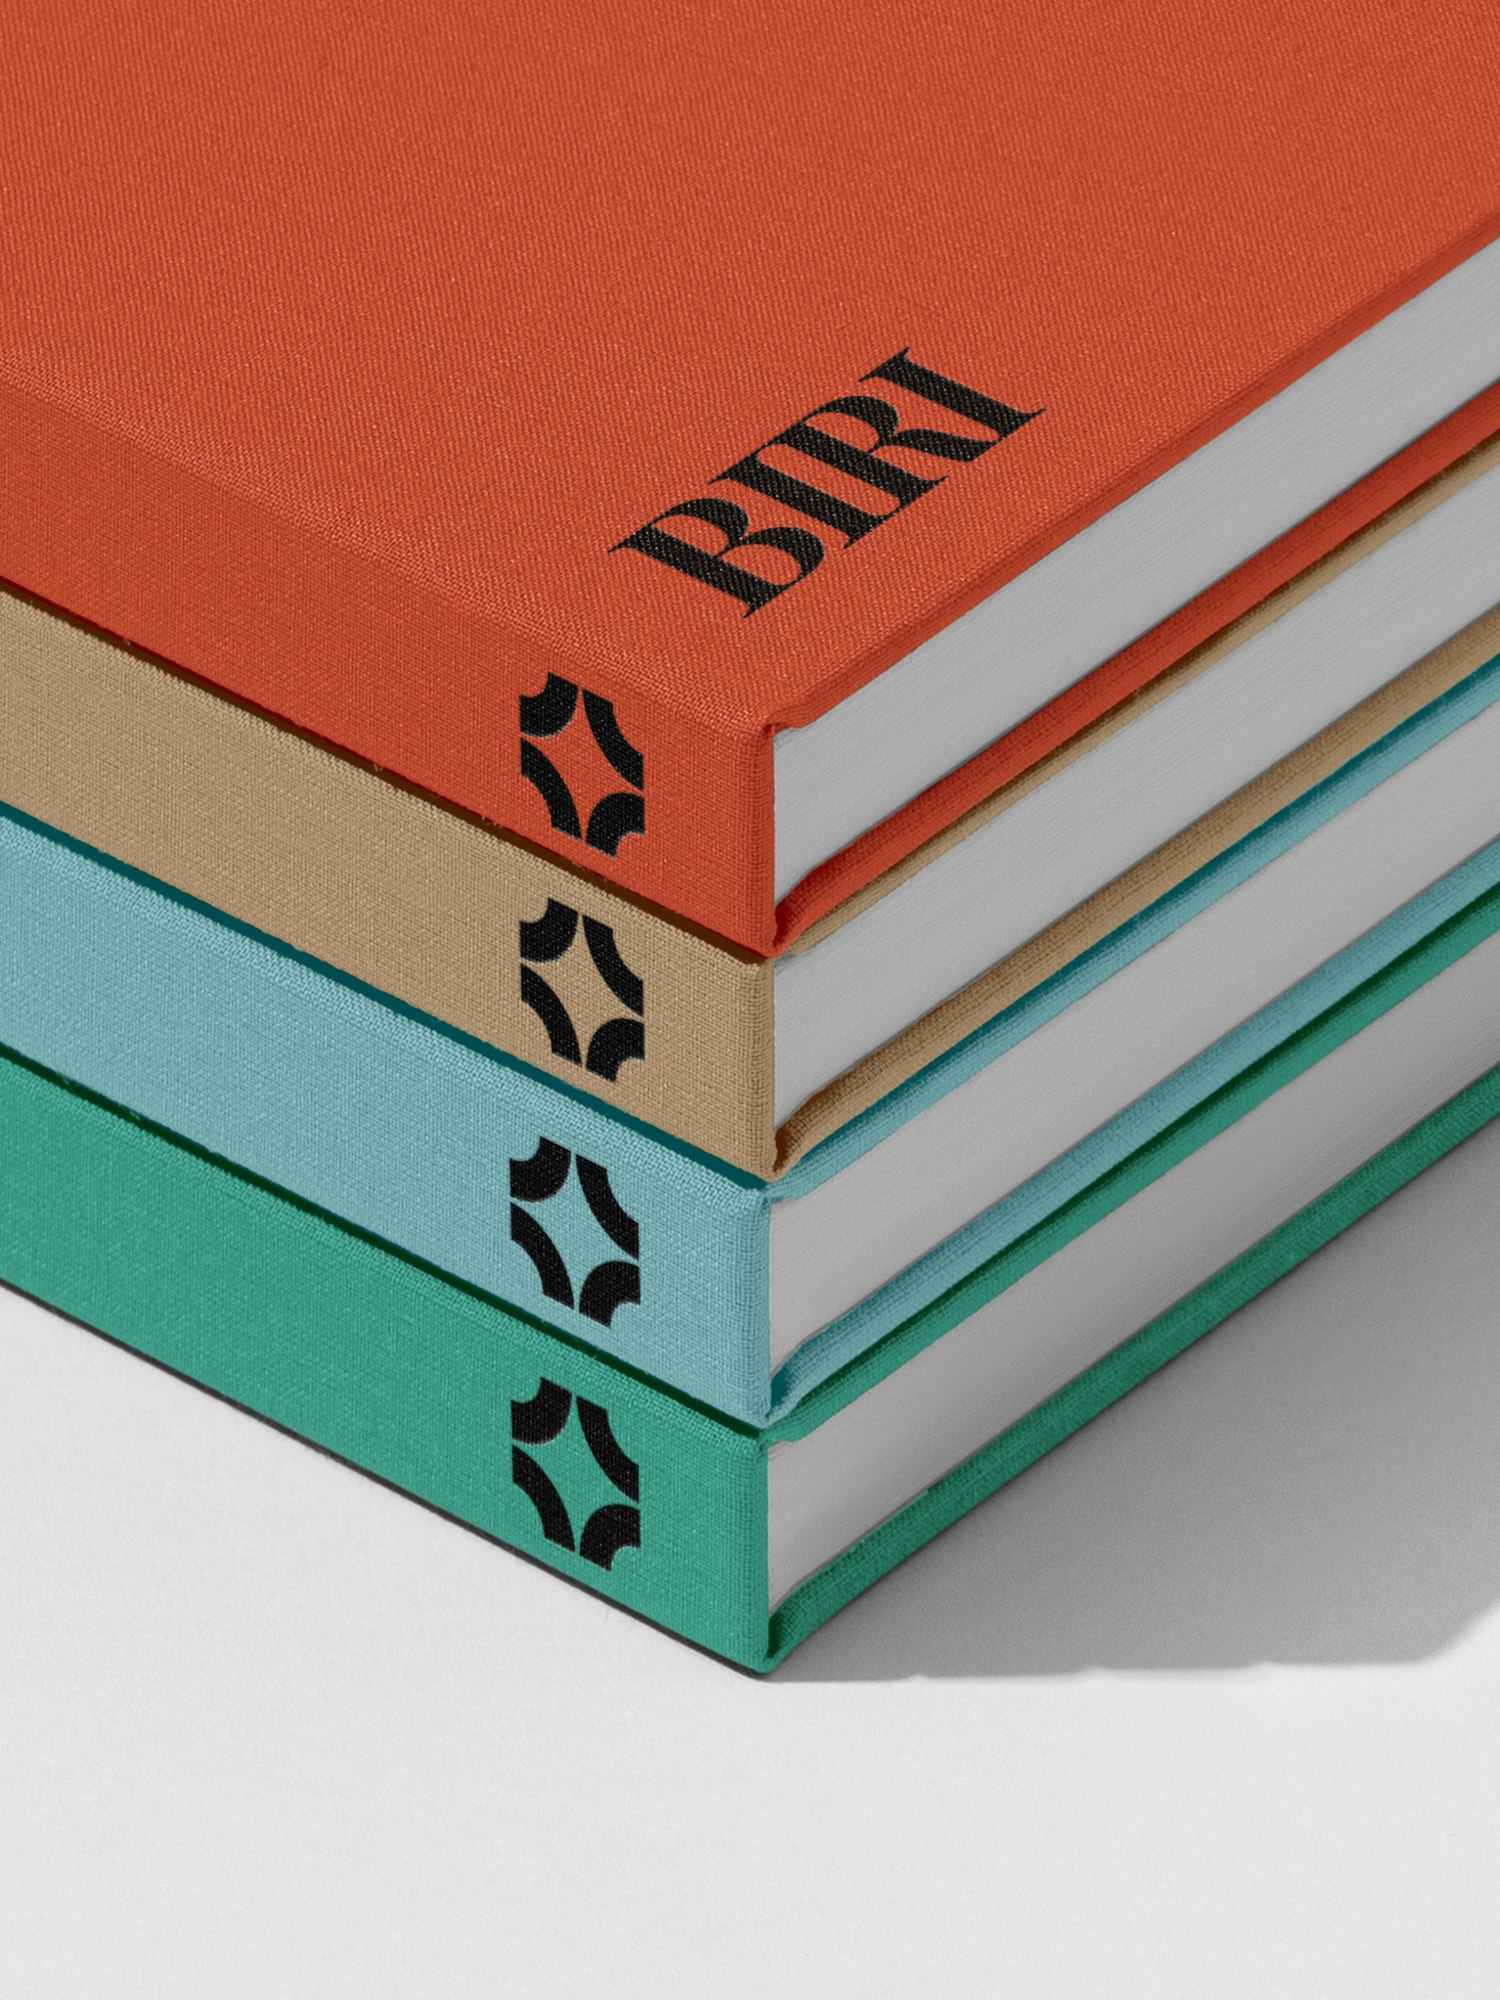 A stack of notebooks or books featuring the BIRI logotype and marque.